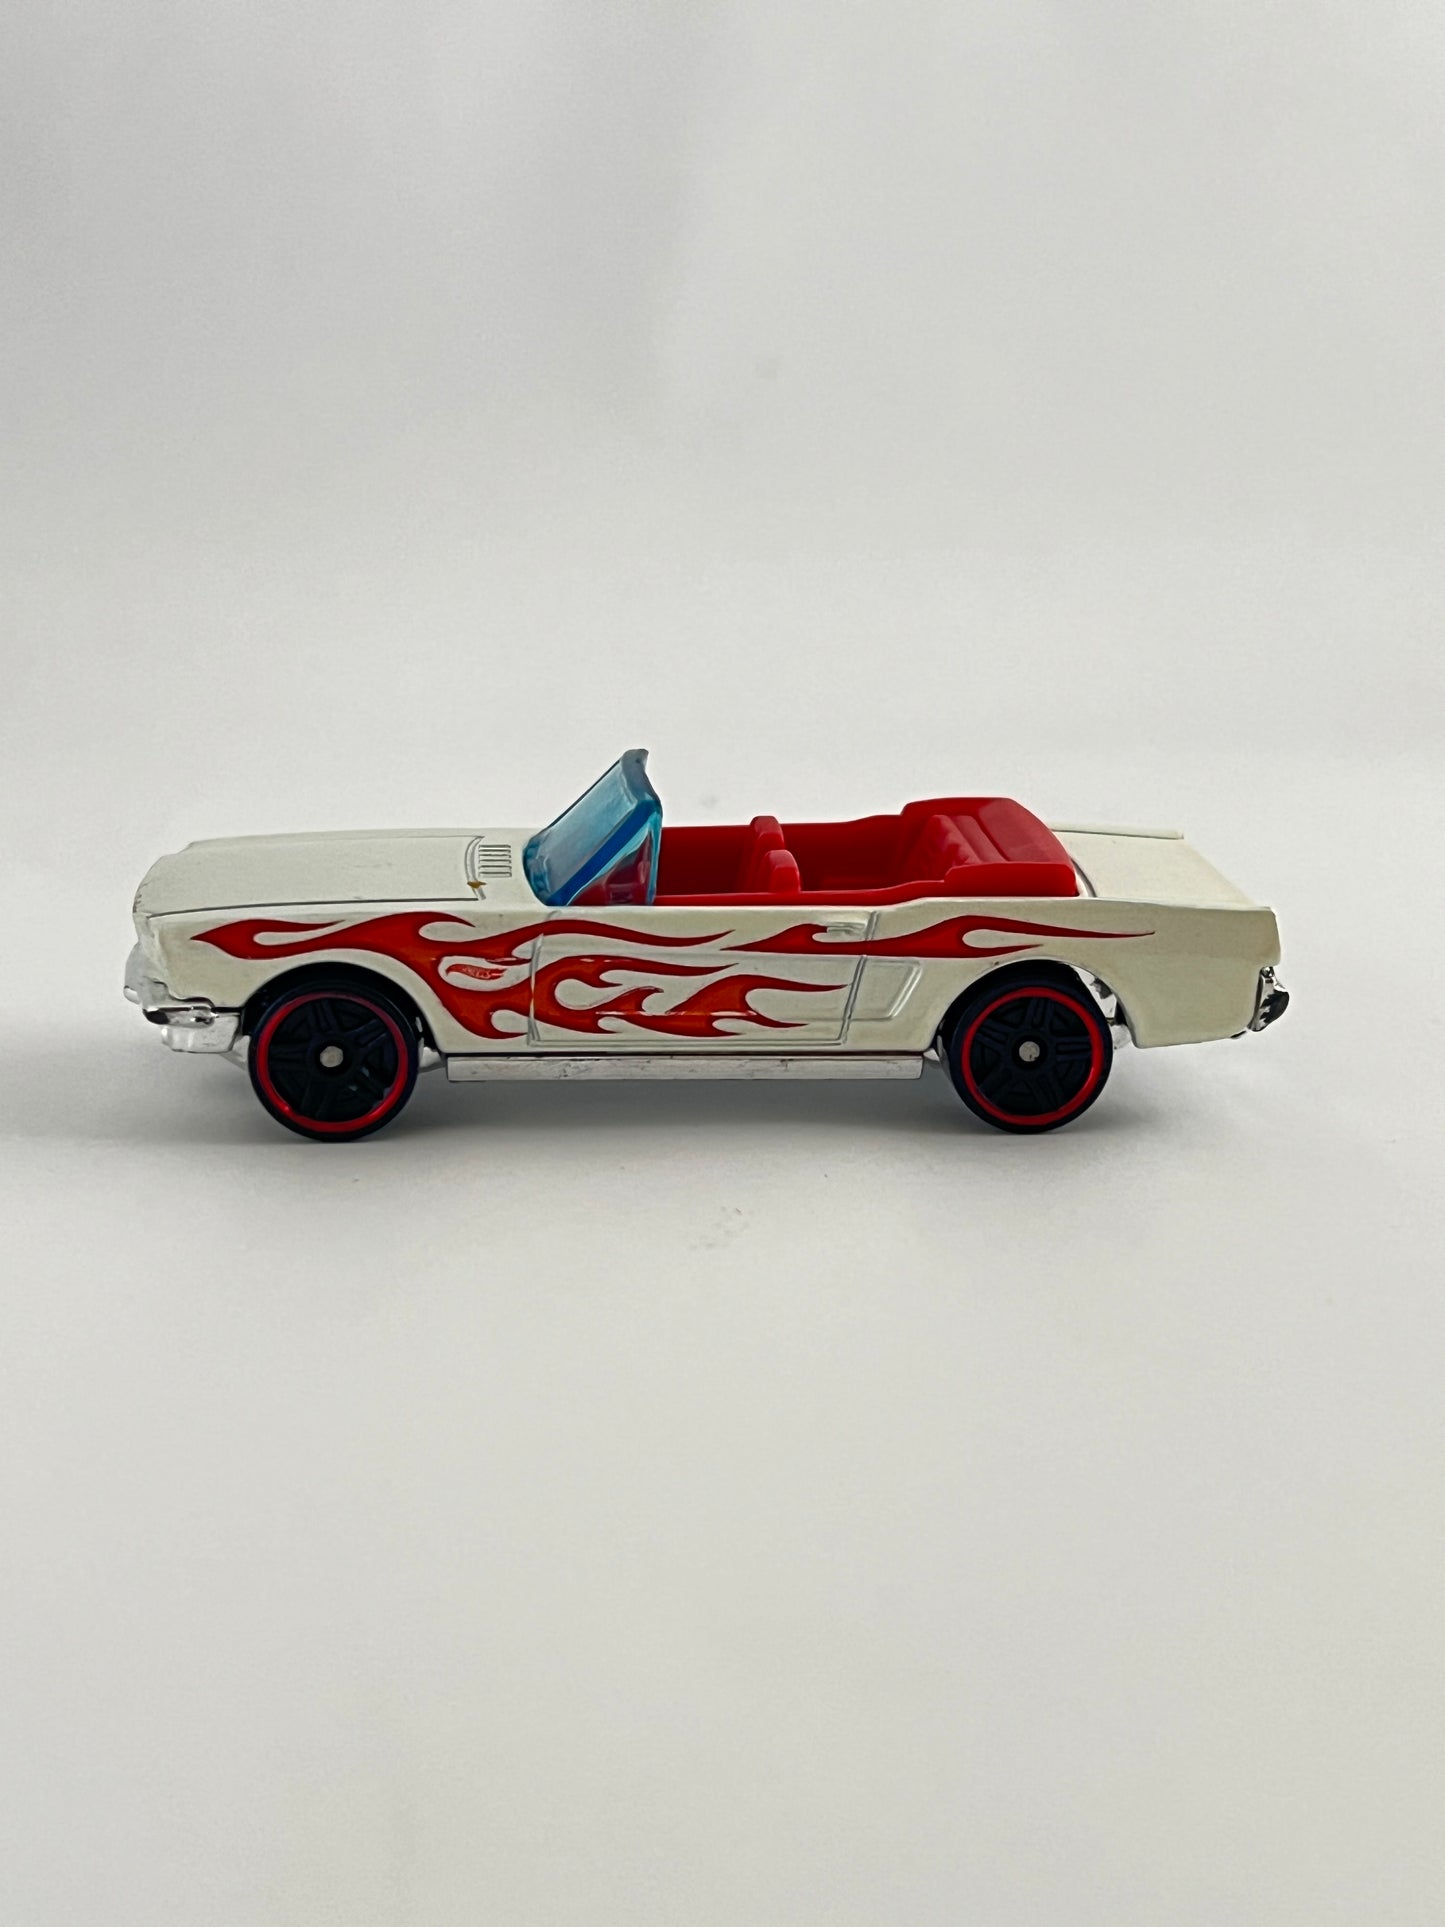 65 MUSTANG CONVERTIBLE - UNCARDED - MINT